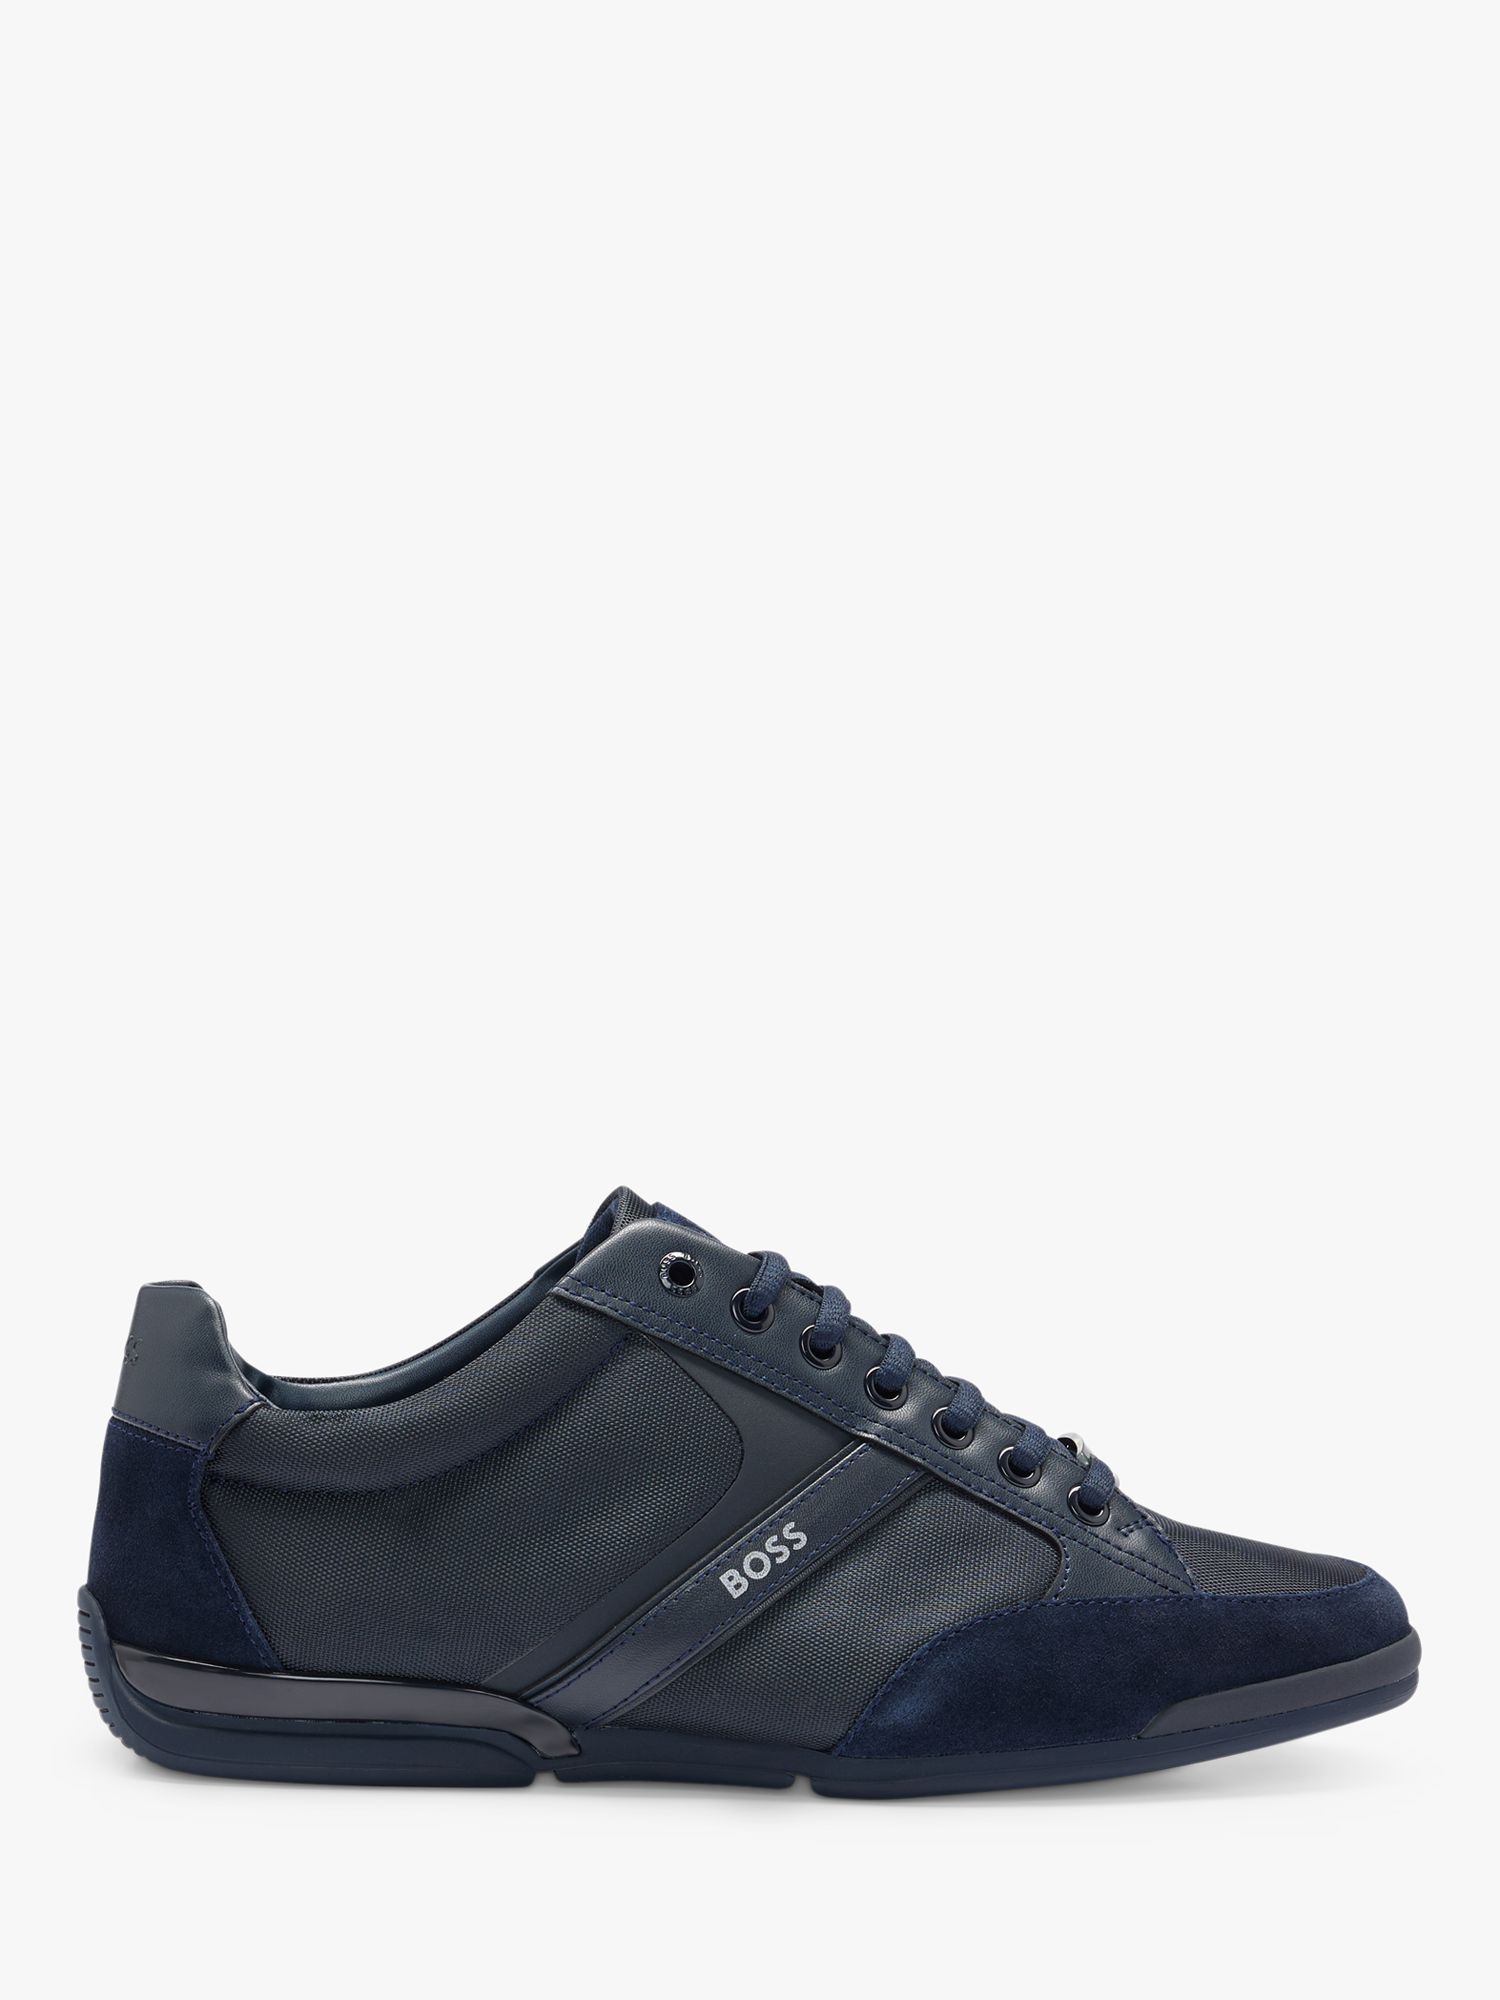 HUGO BOSS Saturn 401 Lace Up Trainers, Dark Blue at John Lewis & Partners